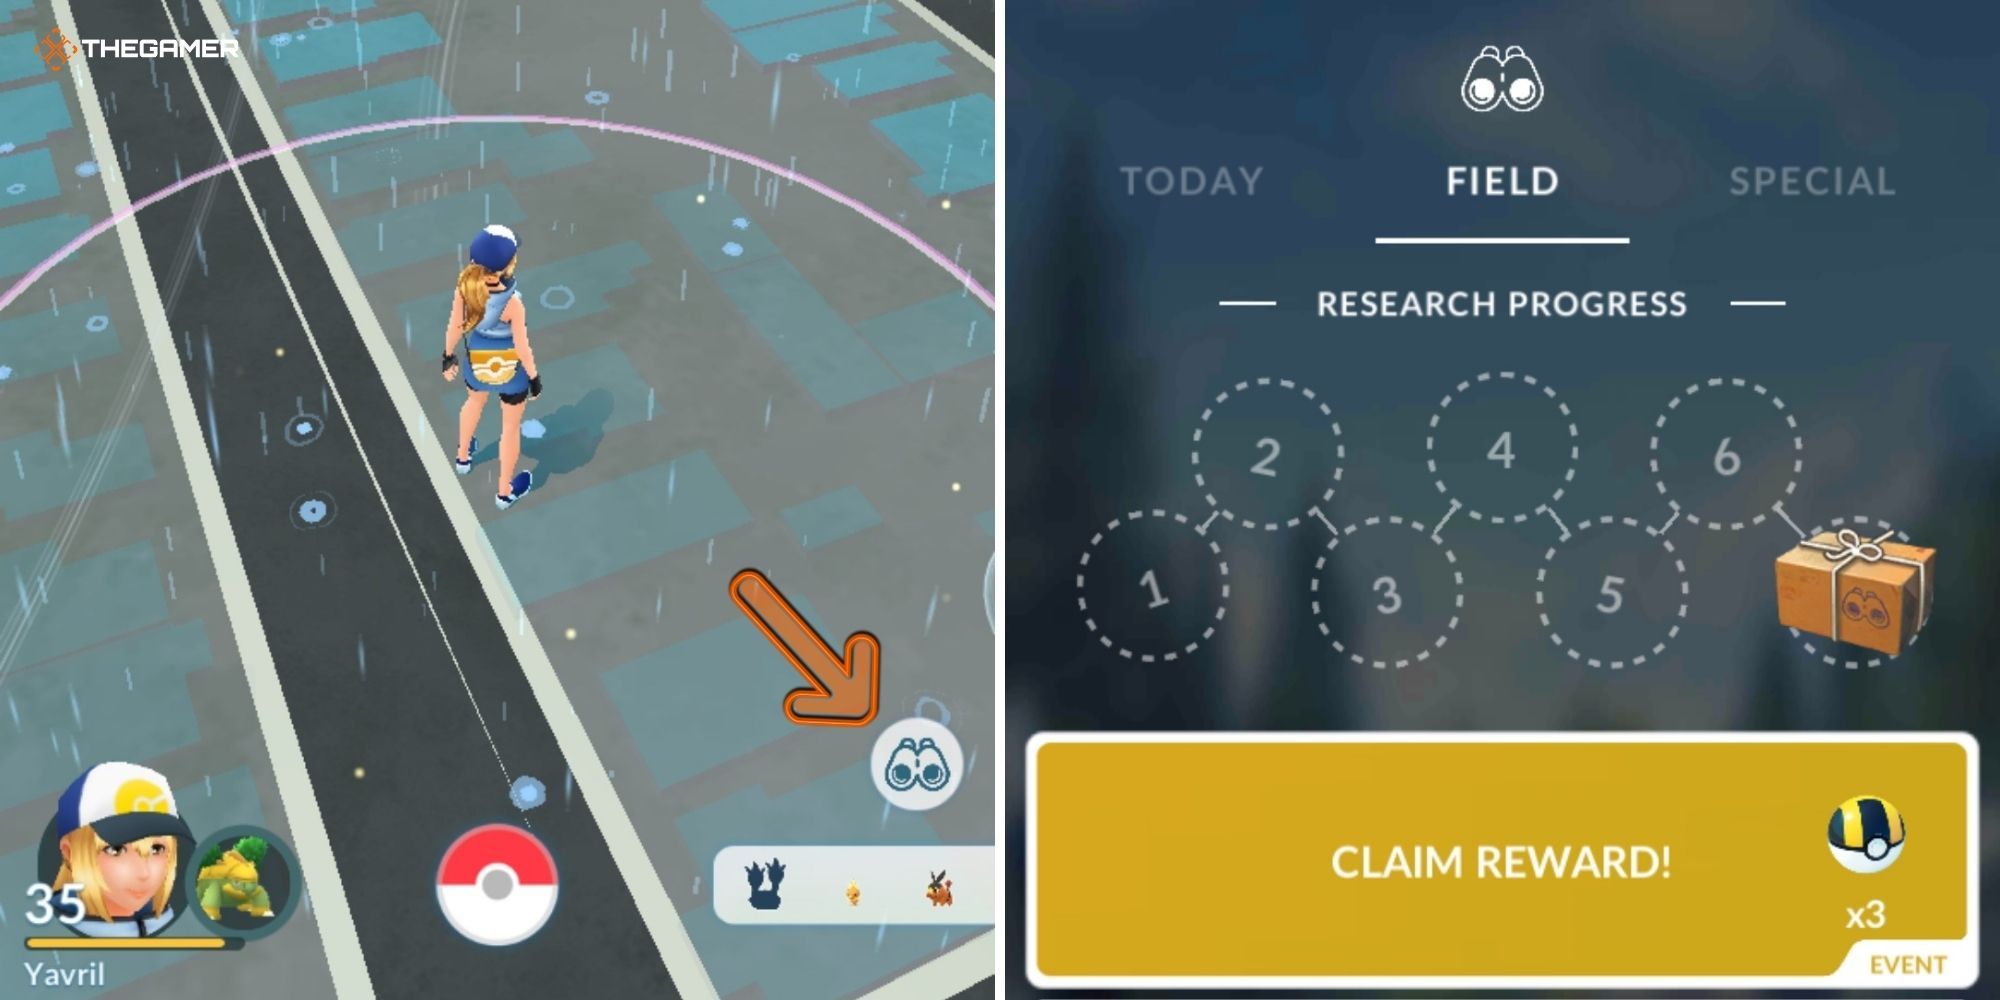 Pokemon Go Overworld With Player Walking Around And Menu (left), Field Research Menu (right) (1)